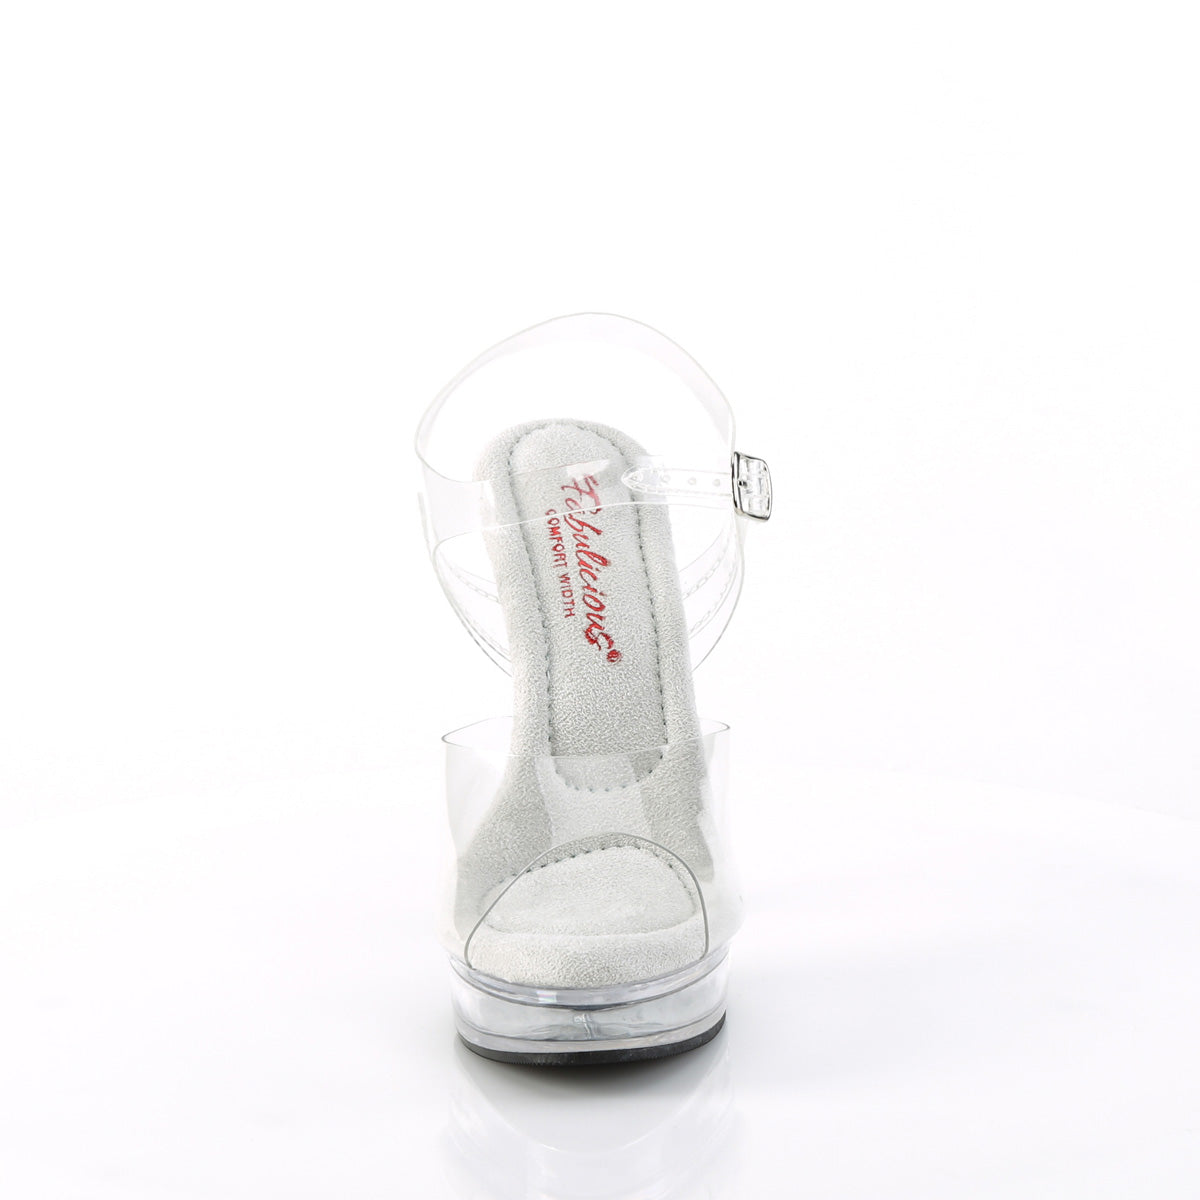 MAJESTY-508 Fabulicious Transparent Clear Shoes [Posing Heels]